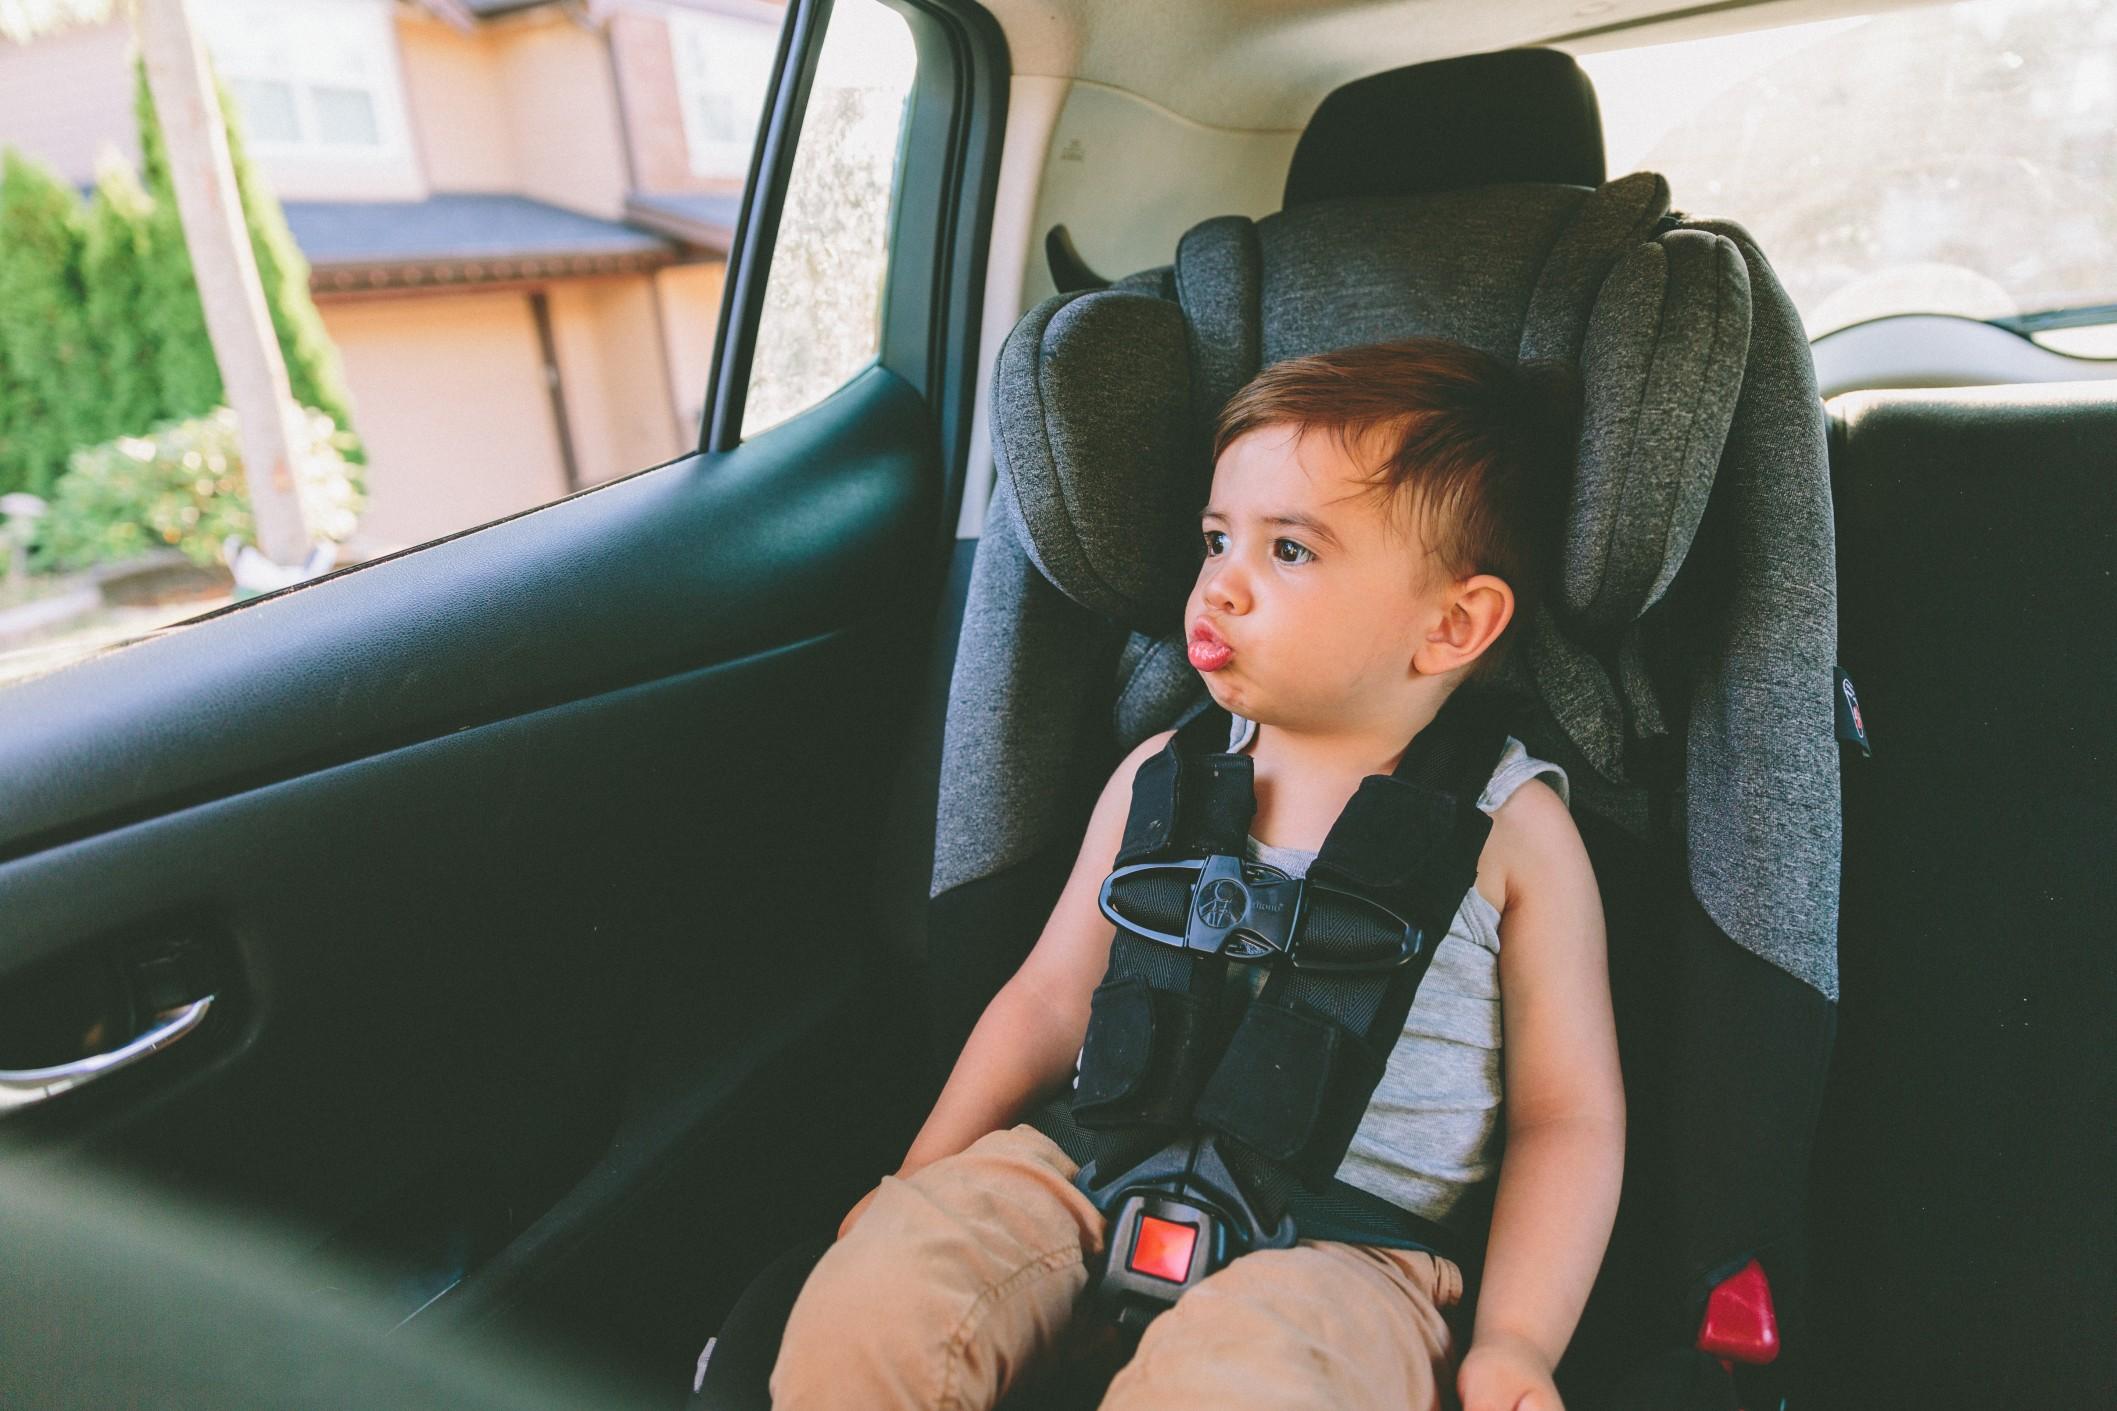 Once children outgrow the rear-facing car seat, they are ready to travel in a forward-facing car seat with a harness.